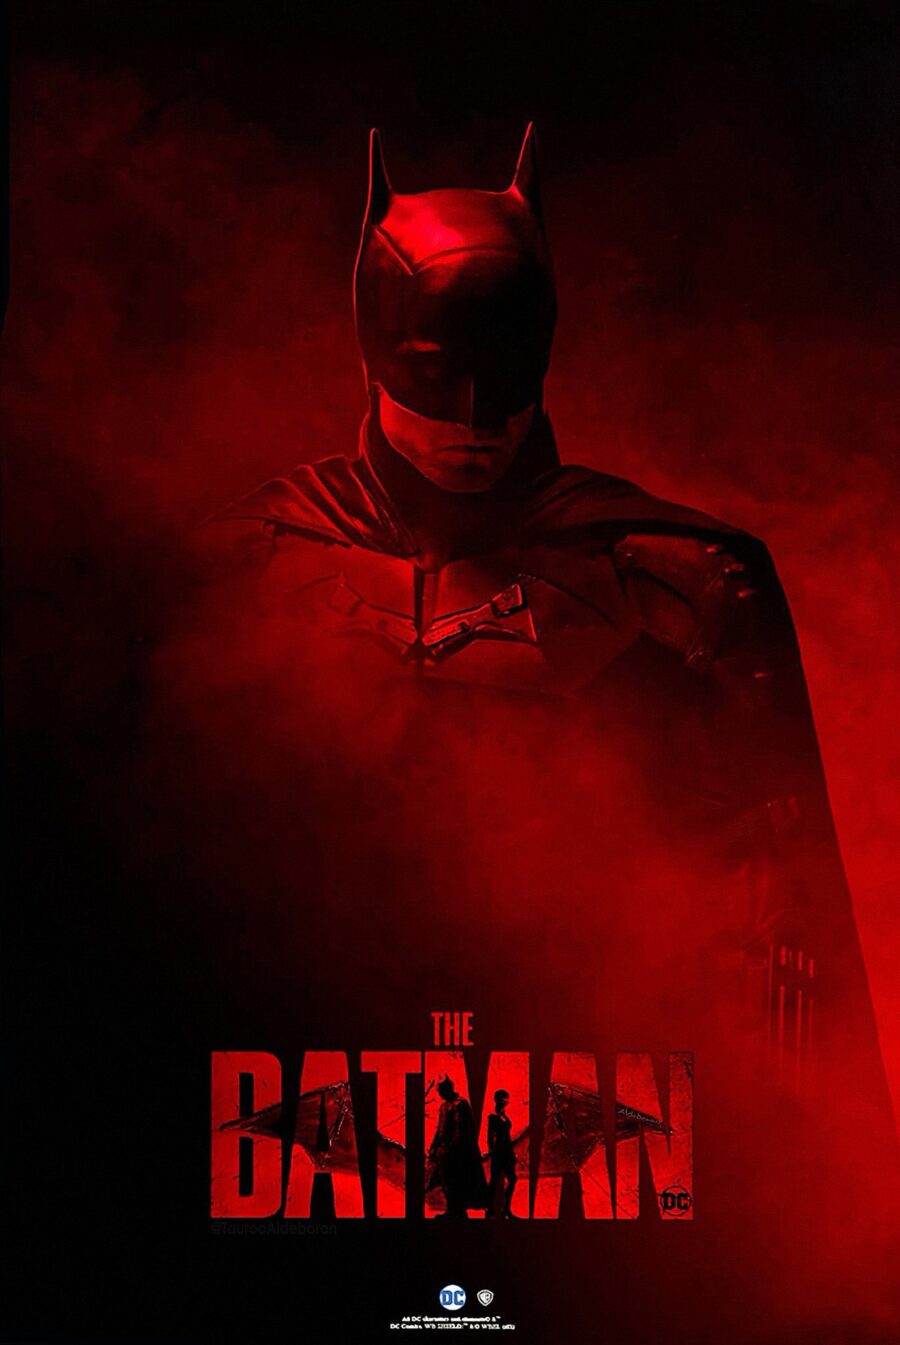 Robert Pattinson's New Posters For The Batman Reveal The Movie's New Tagline